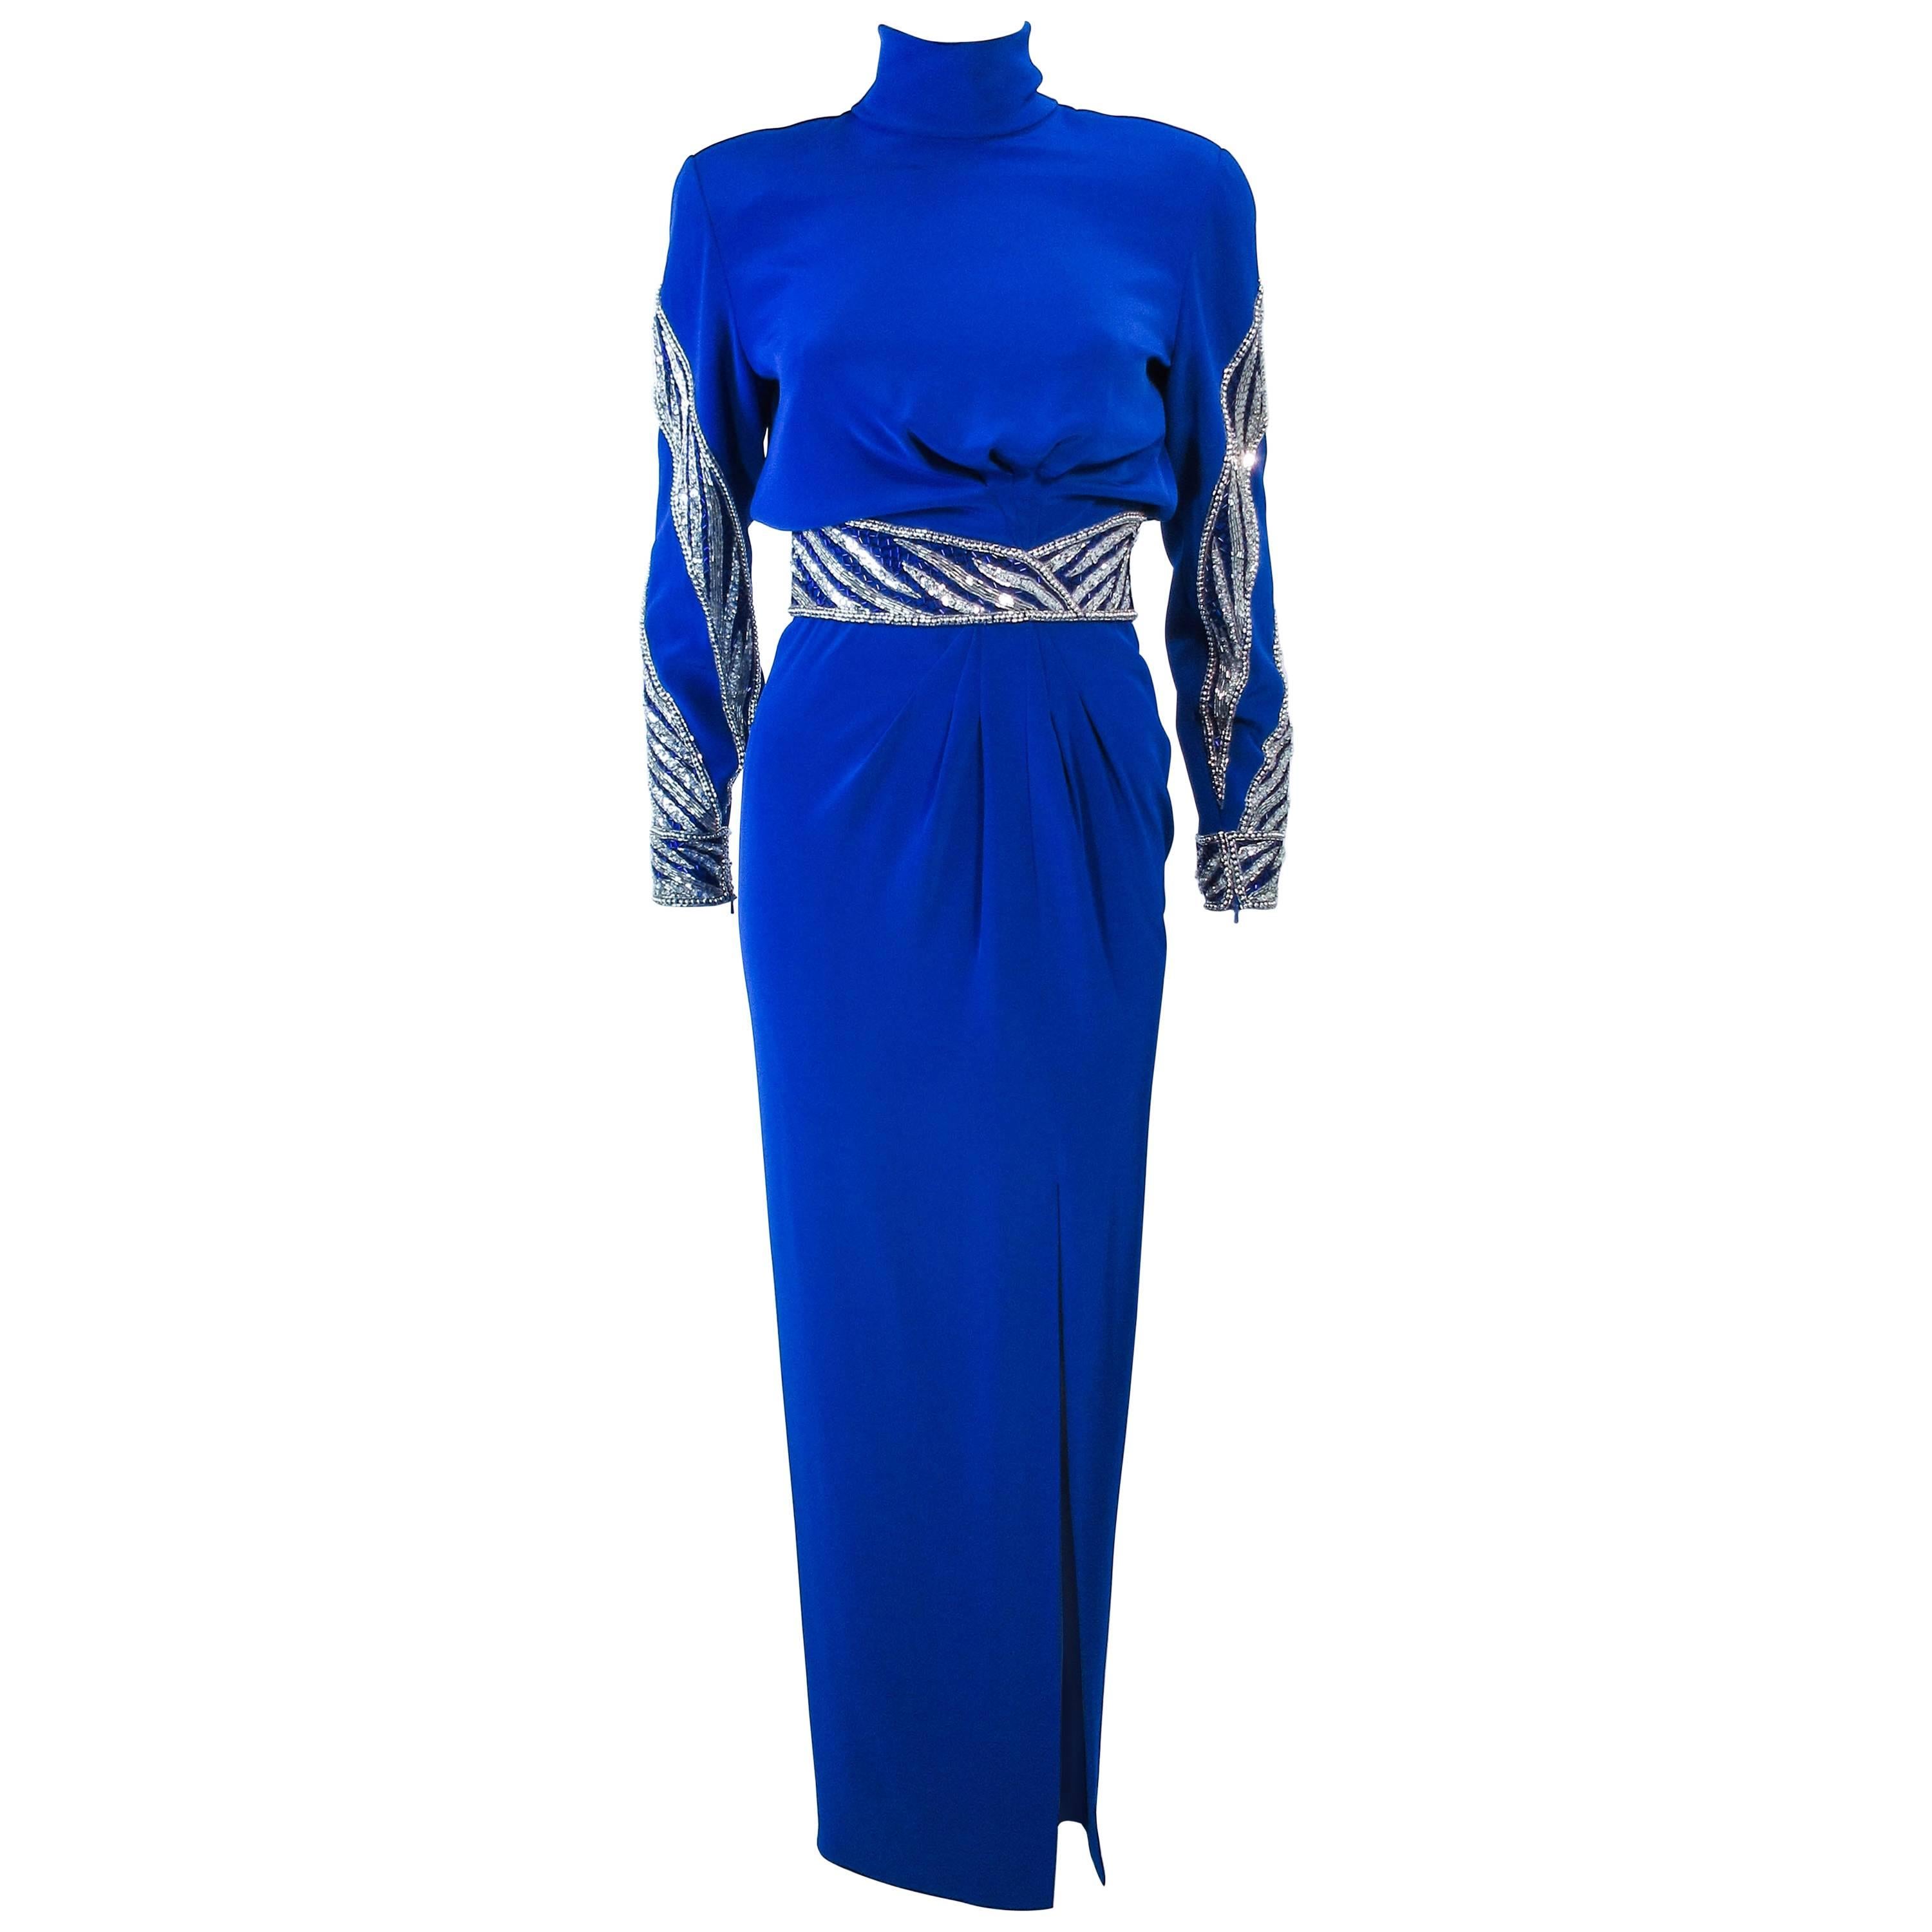 BOB MACKIE Royal Blue Gown with Beaded Applique Size 4 6 